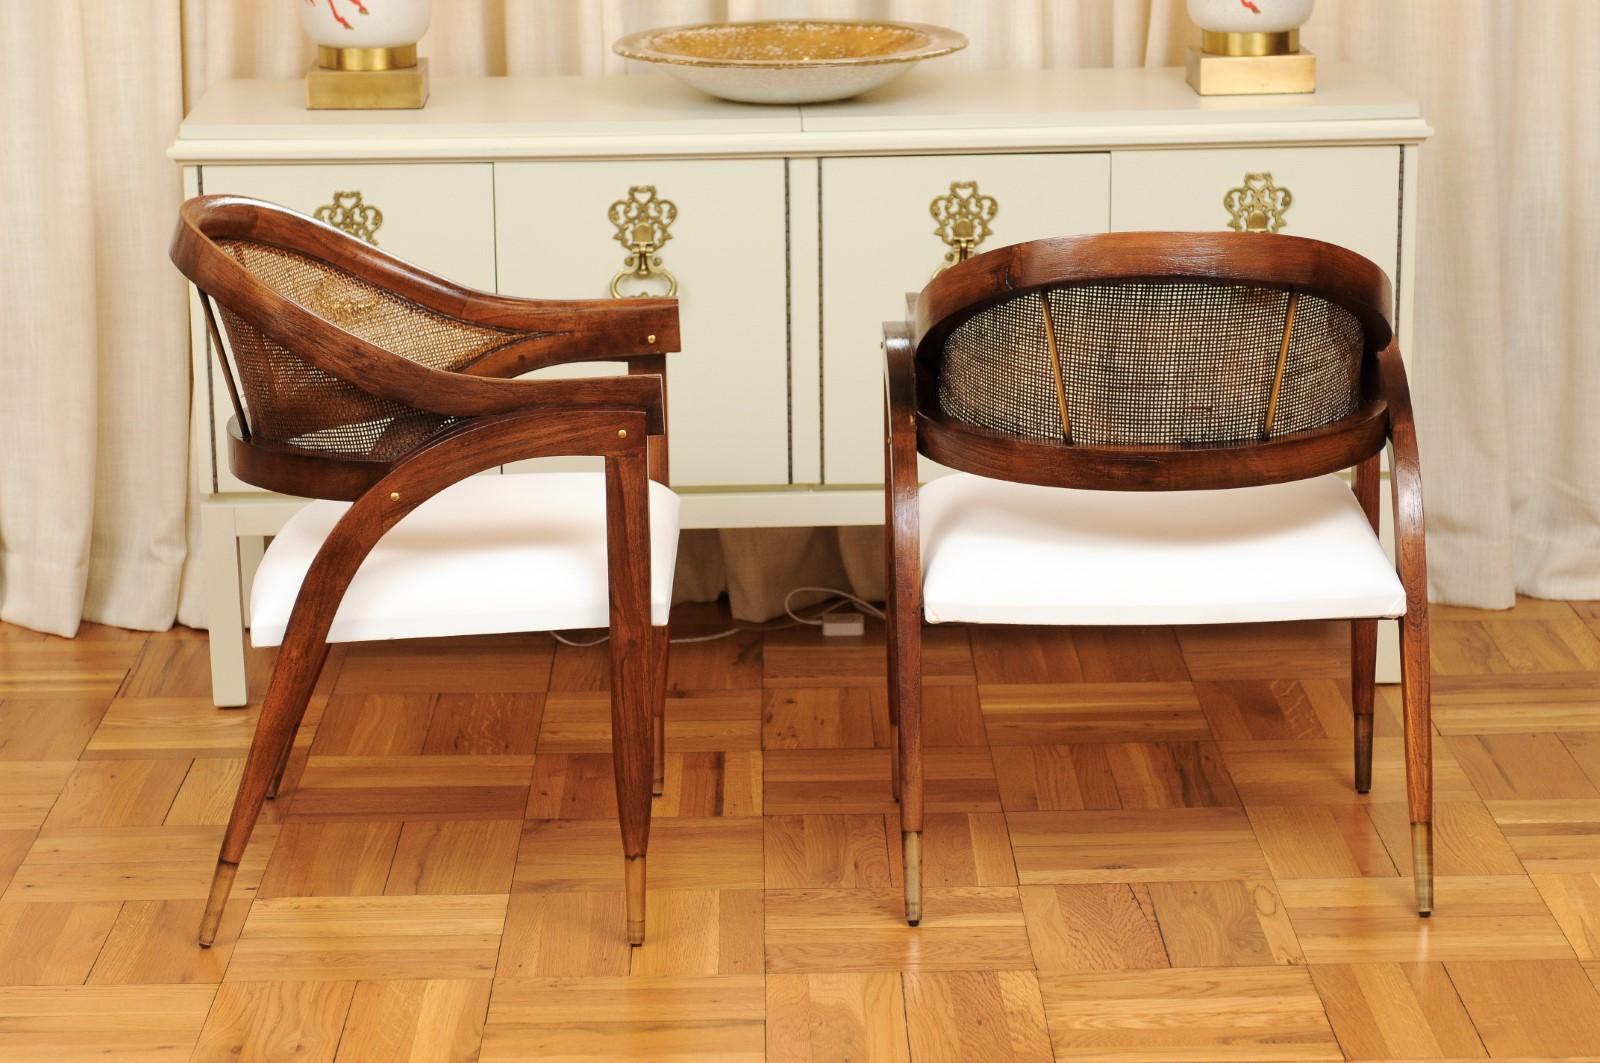 Stunning Restored Pair of Custom Teak and Cane Captains Chairs For Sale 1